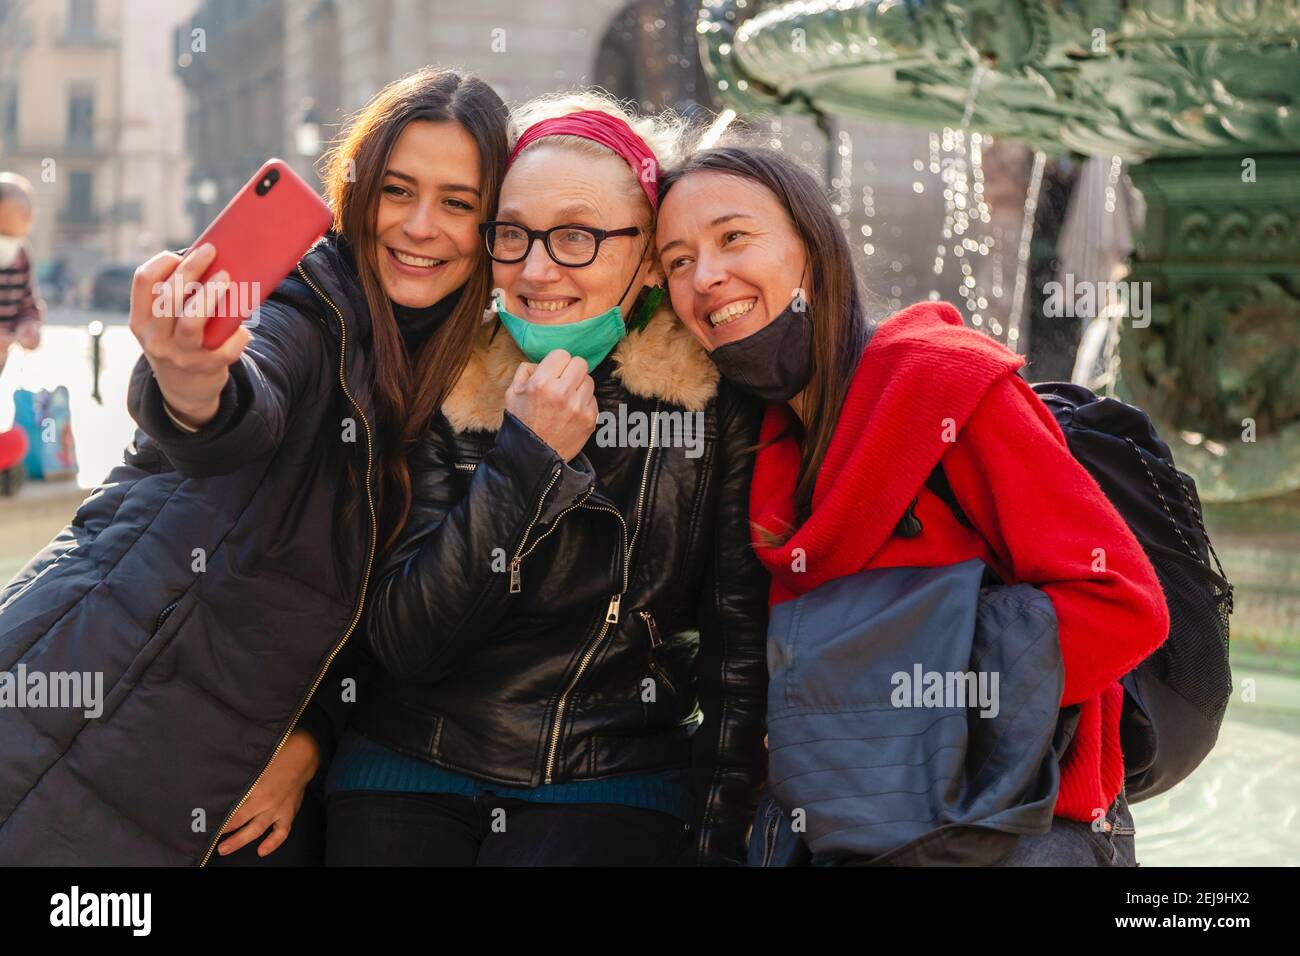 Three women friends capturing a selfie with a smart phone, smiling and sitting close together in urban environment Stock Photo